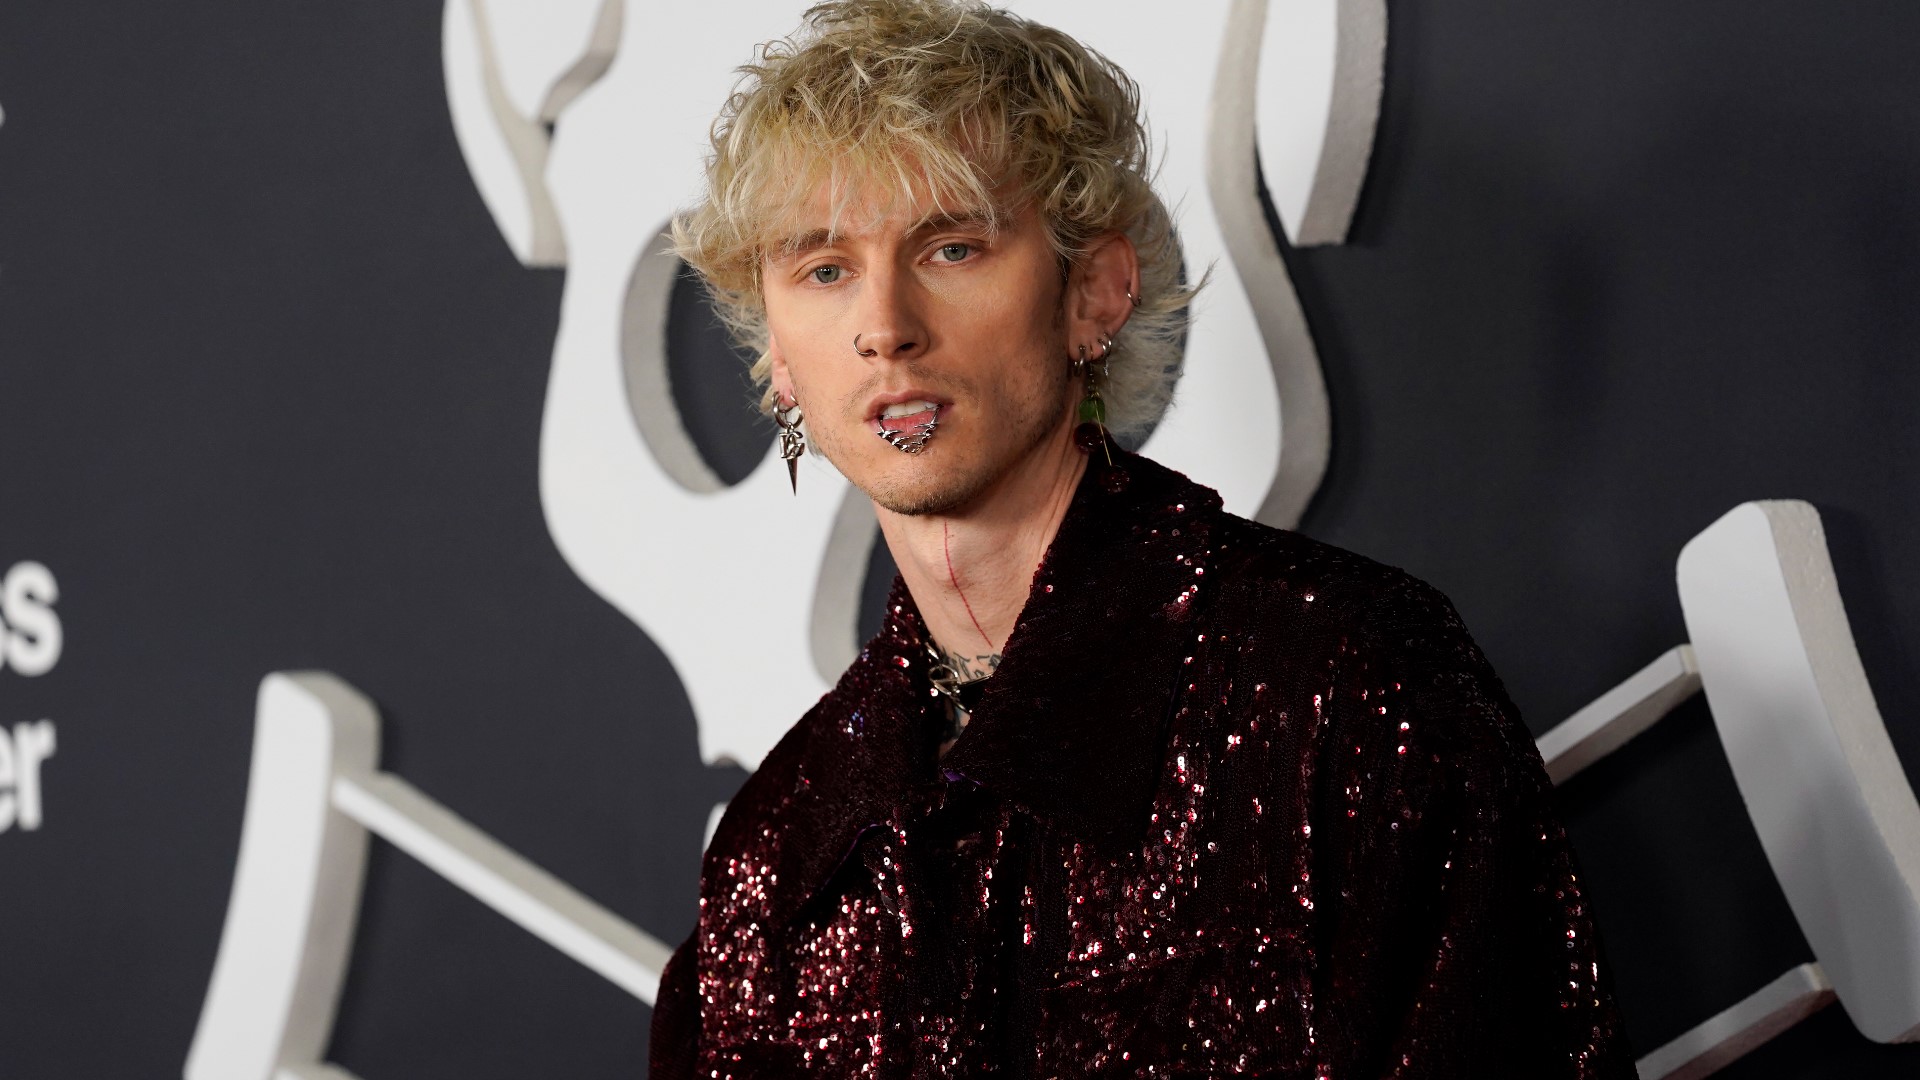 Cleveland native Machine Gun Kelly is set to bring his Mainstream Sellout Tour to FirstEnergy Stadium in Cleveland on August 13 -- the only stadium stop on the tour.